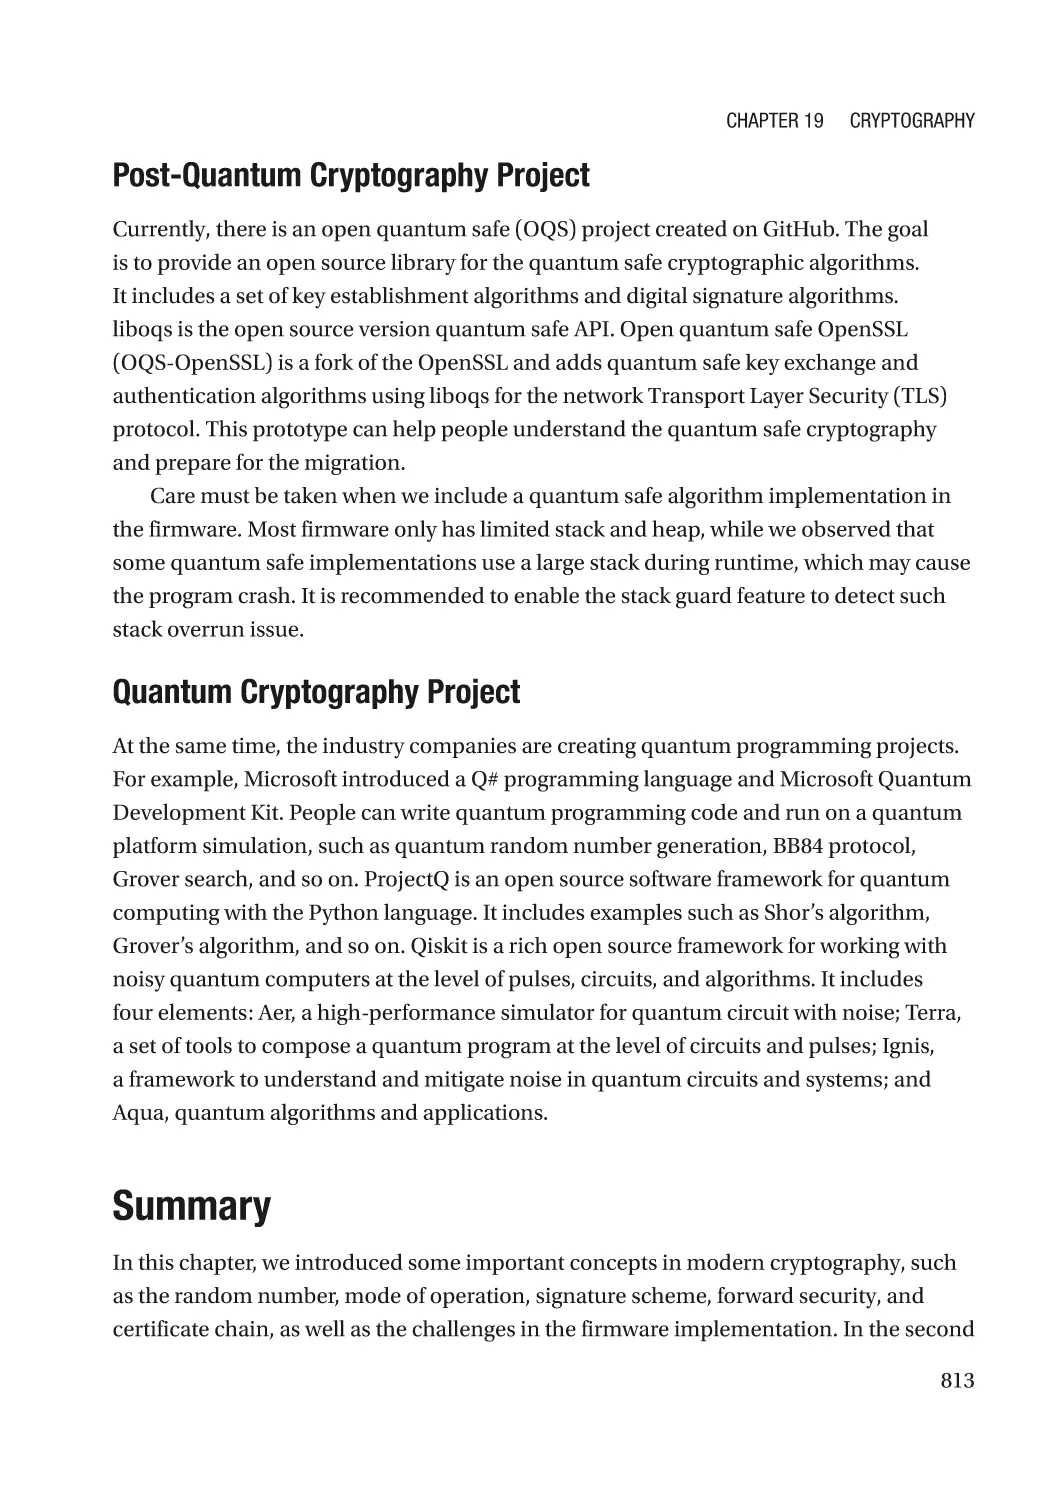 Post-Quantum Cryptography Project
Quantum Cryptography Project
Summary